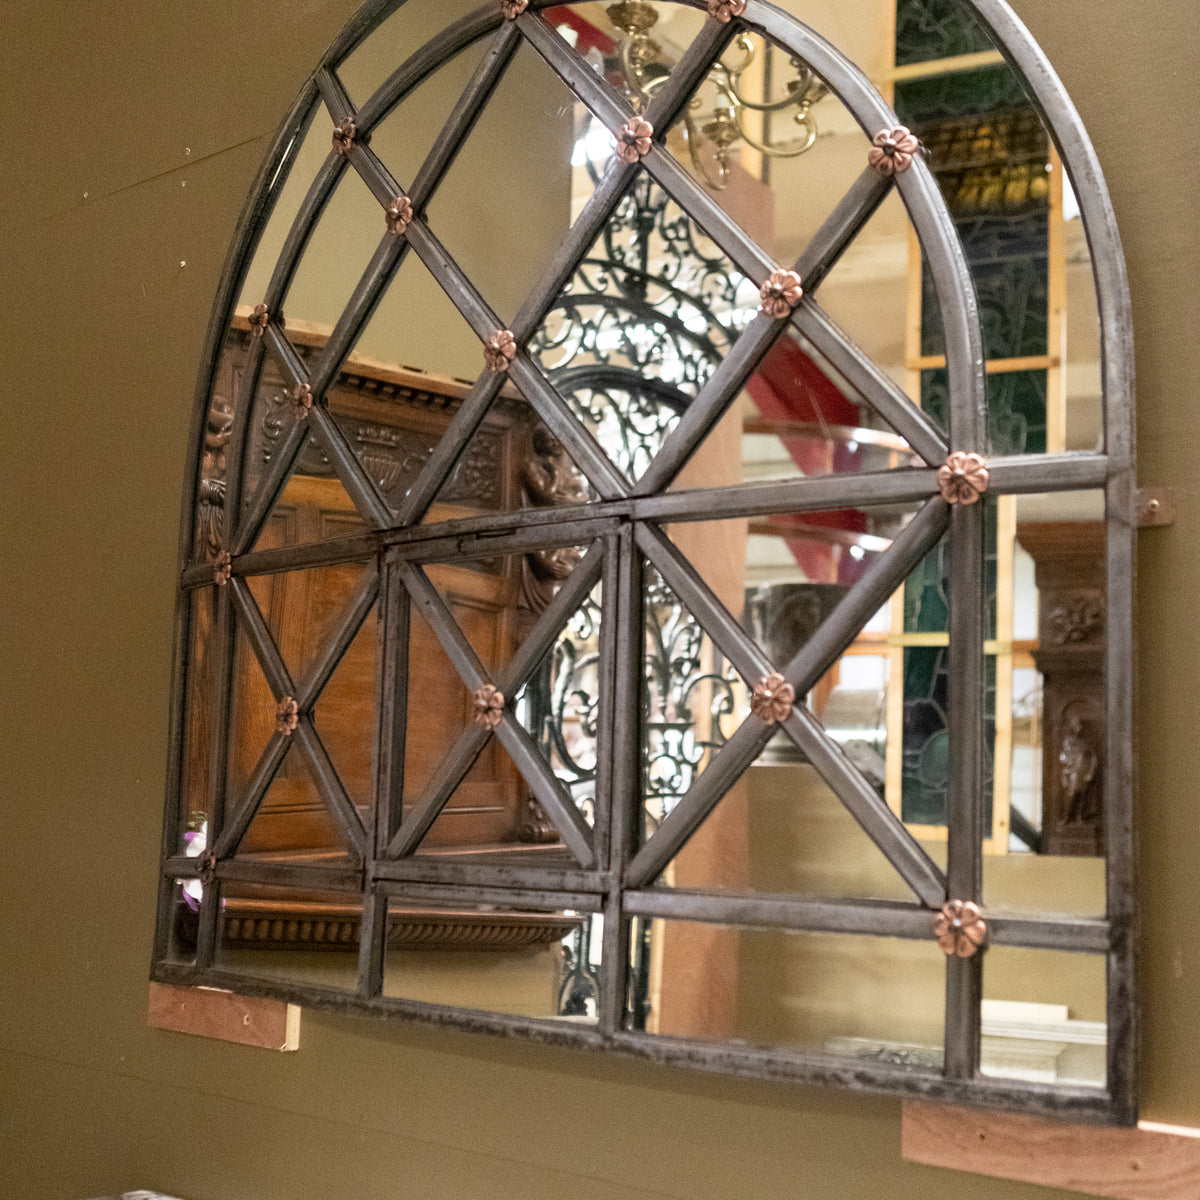 Transformed Antique Tate Britain Gallery Window Frame Mirror | The Architectural Forum